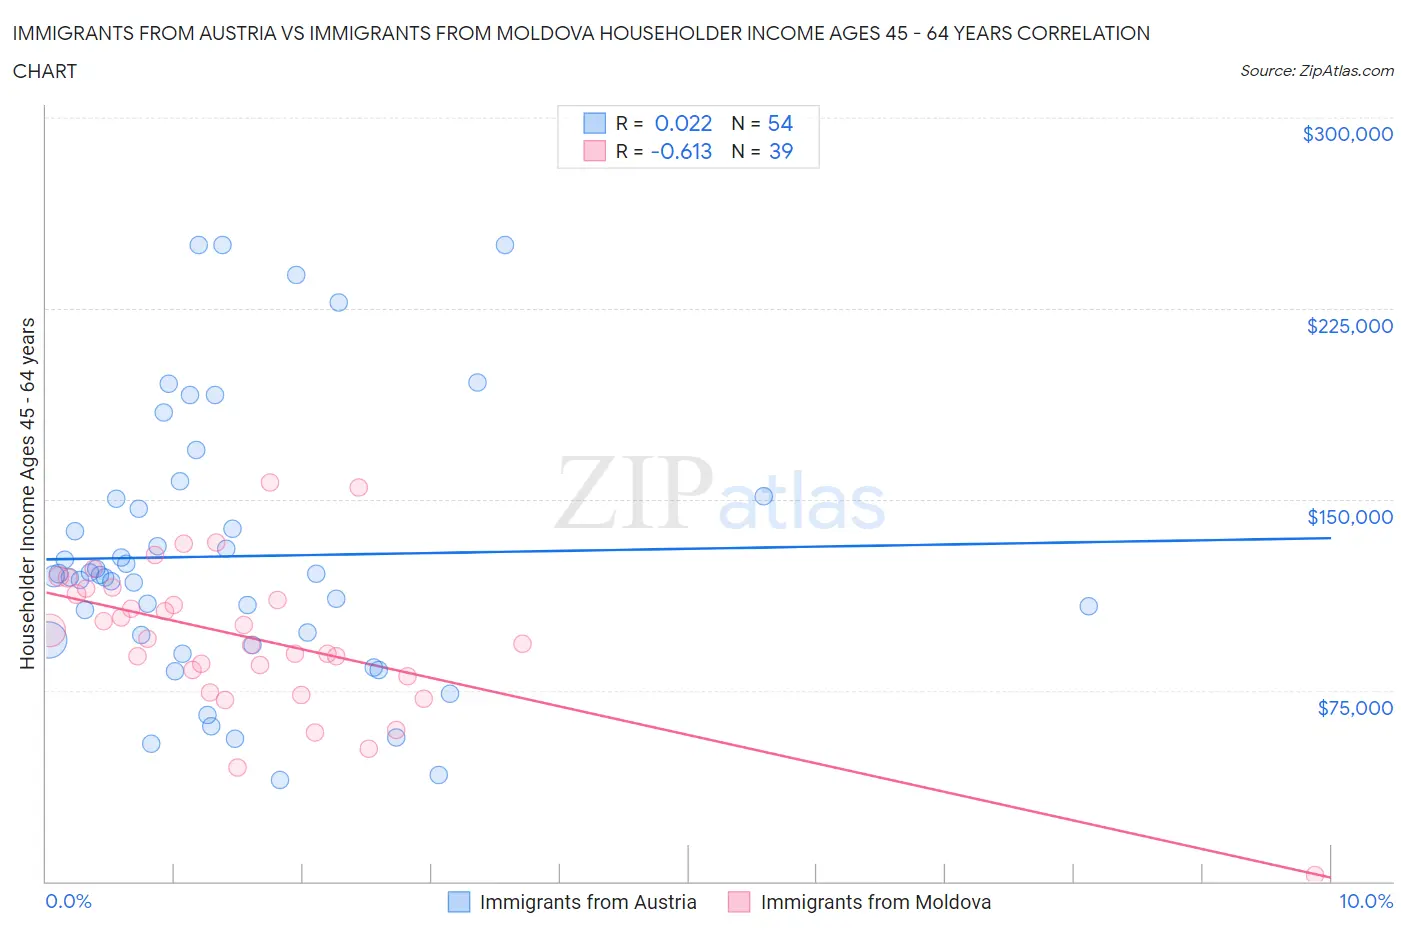 Immigrants from Austria vs Immigrants from Moldova Householder Income Ages 45 - 64 years